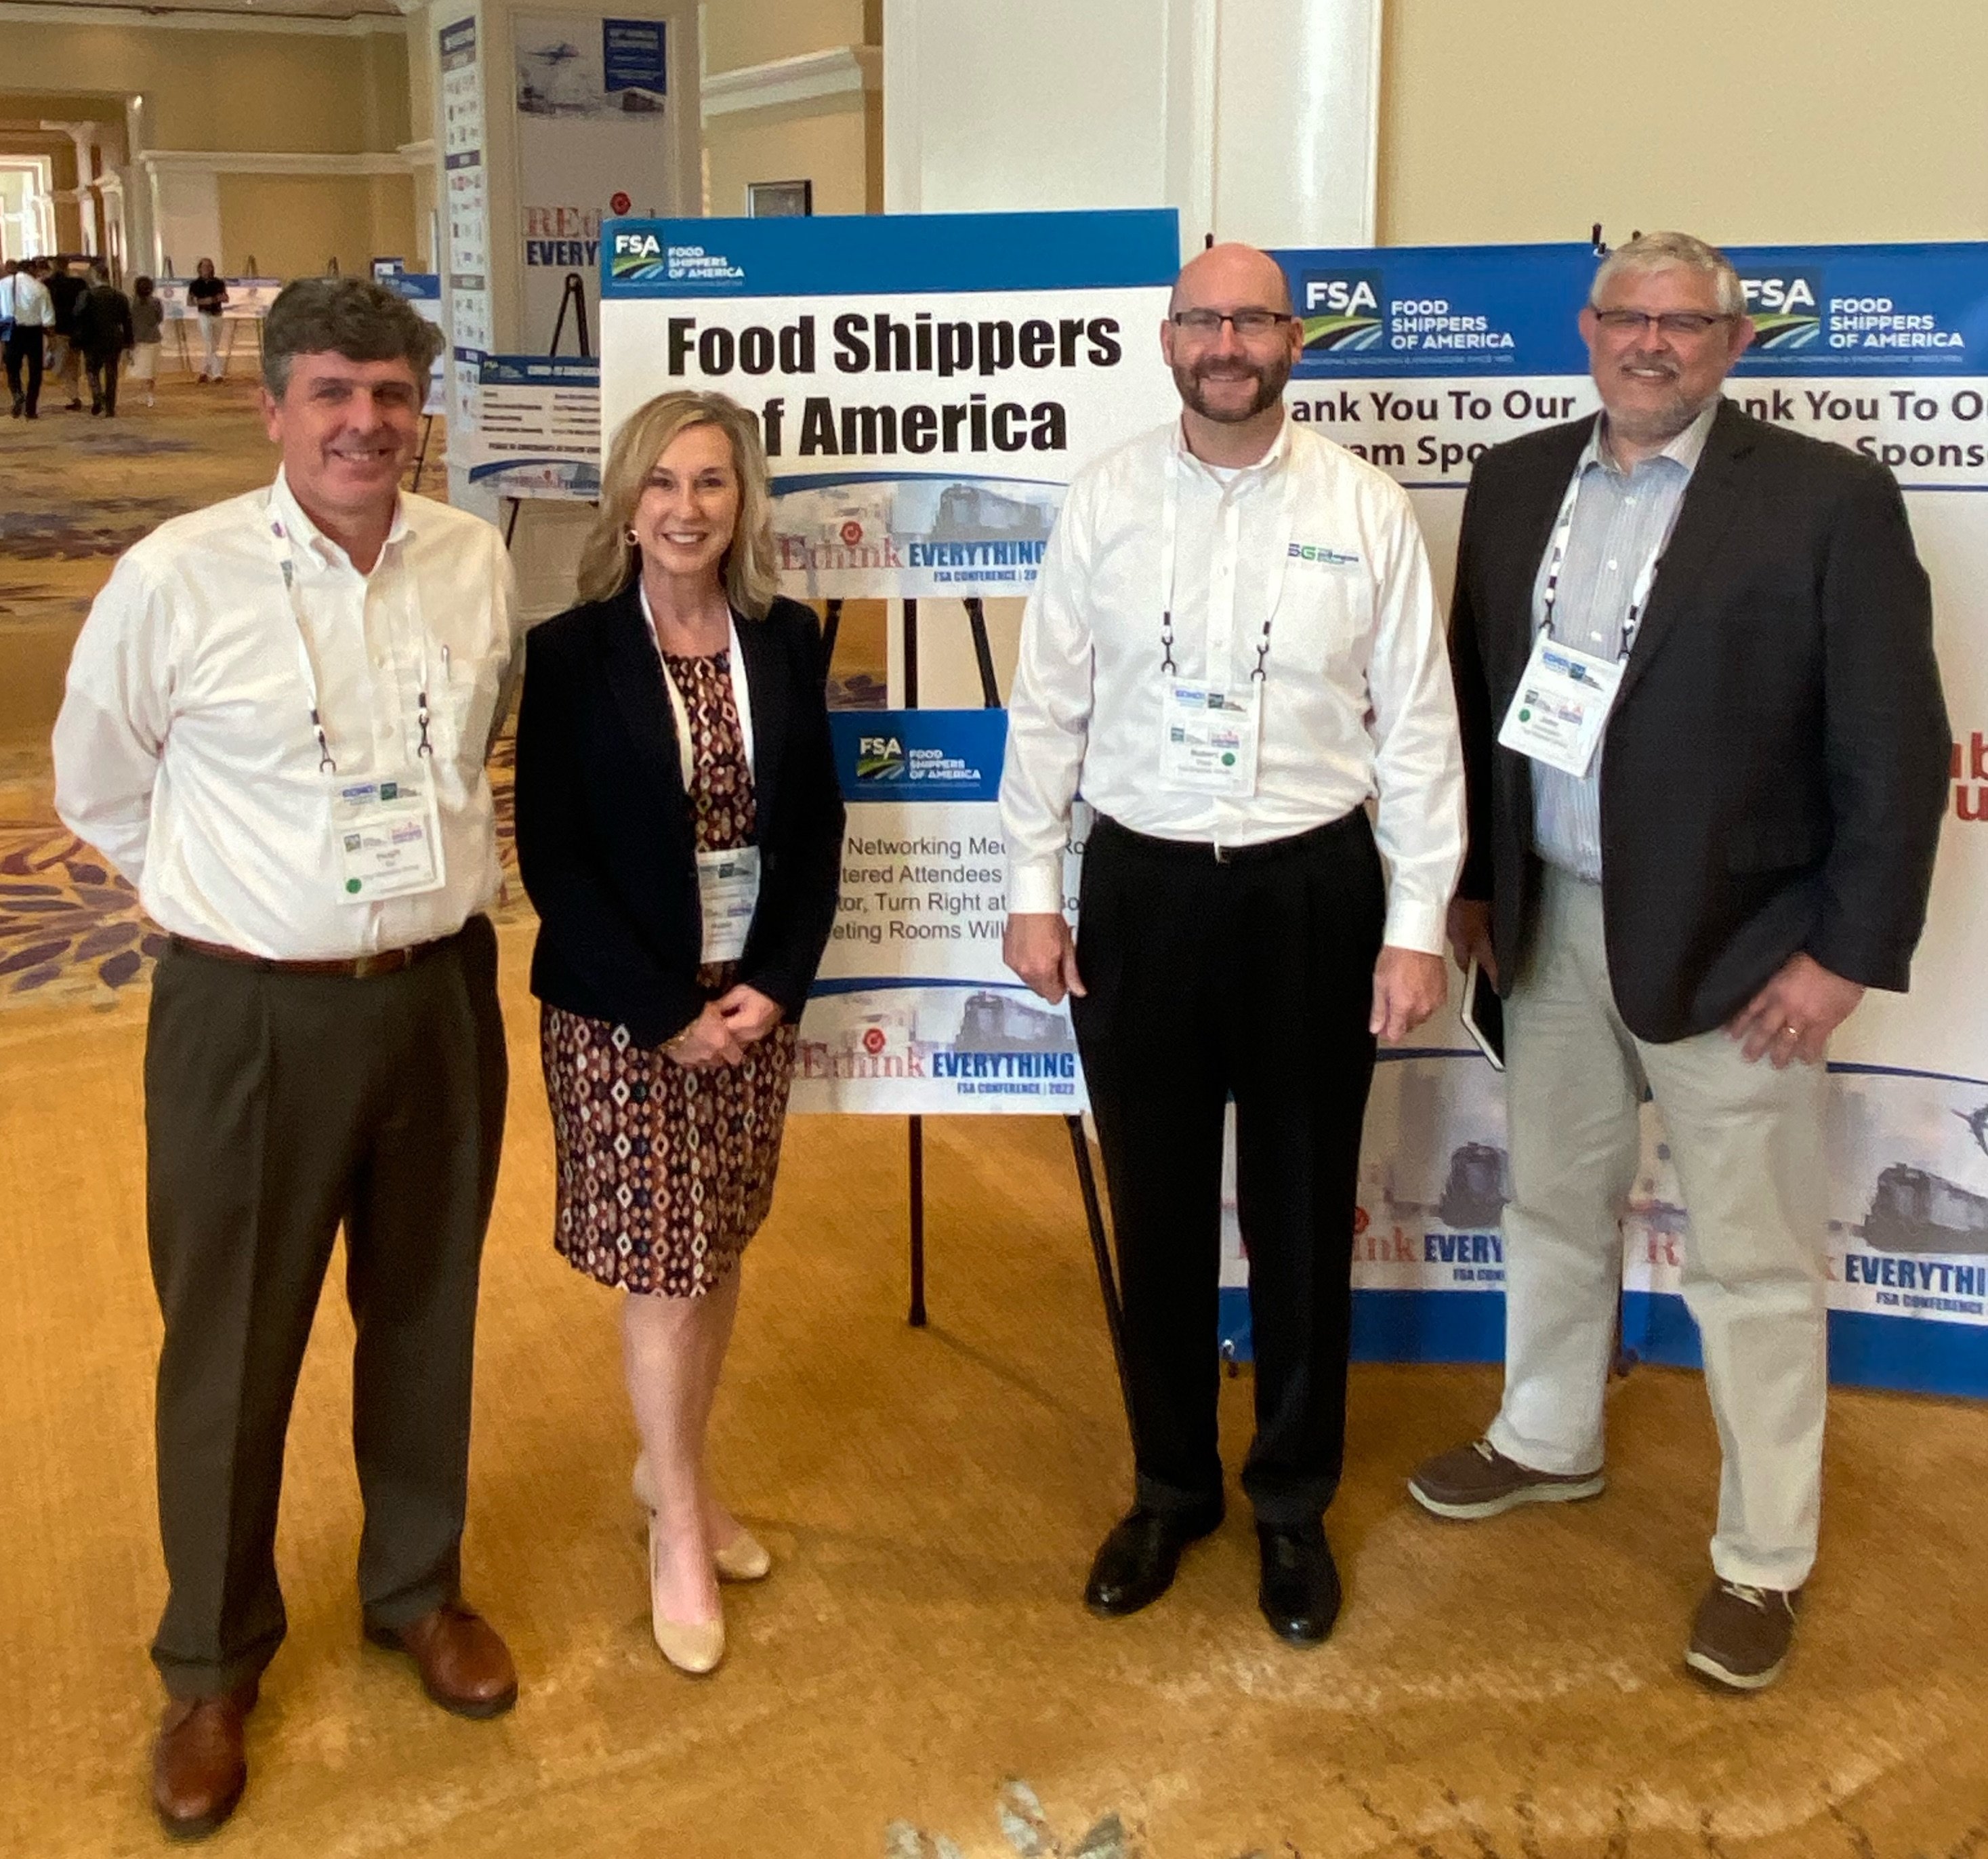 TSG's representatives at the Food Shippers of America Conference